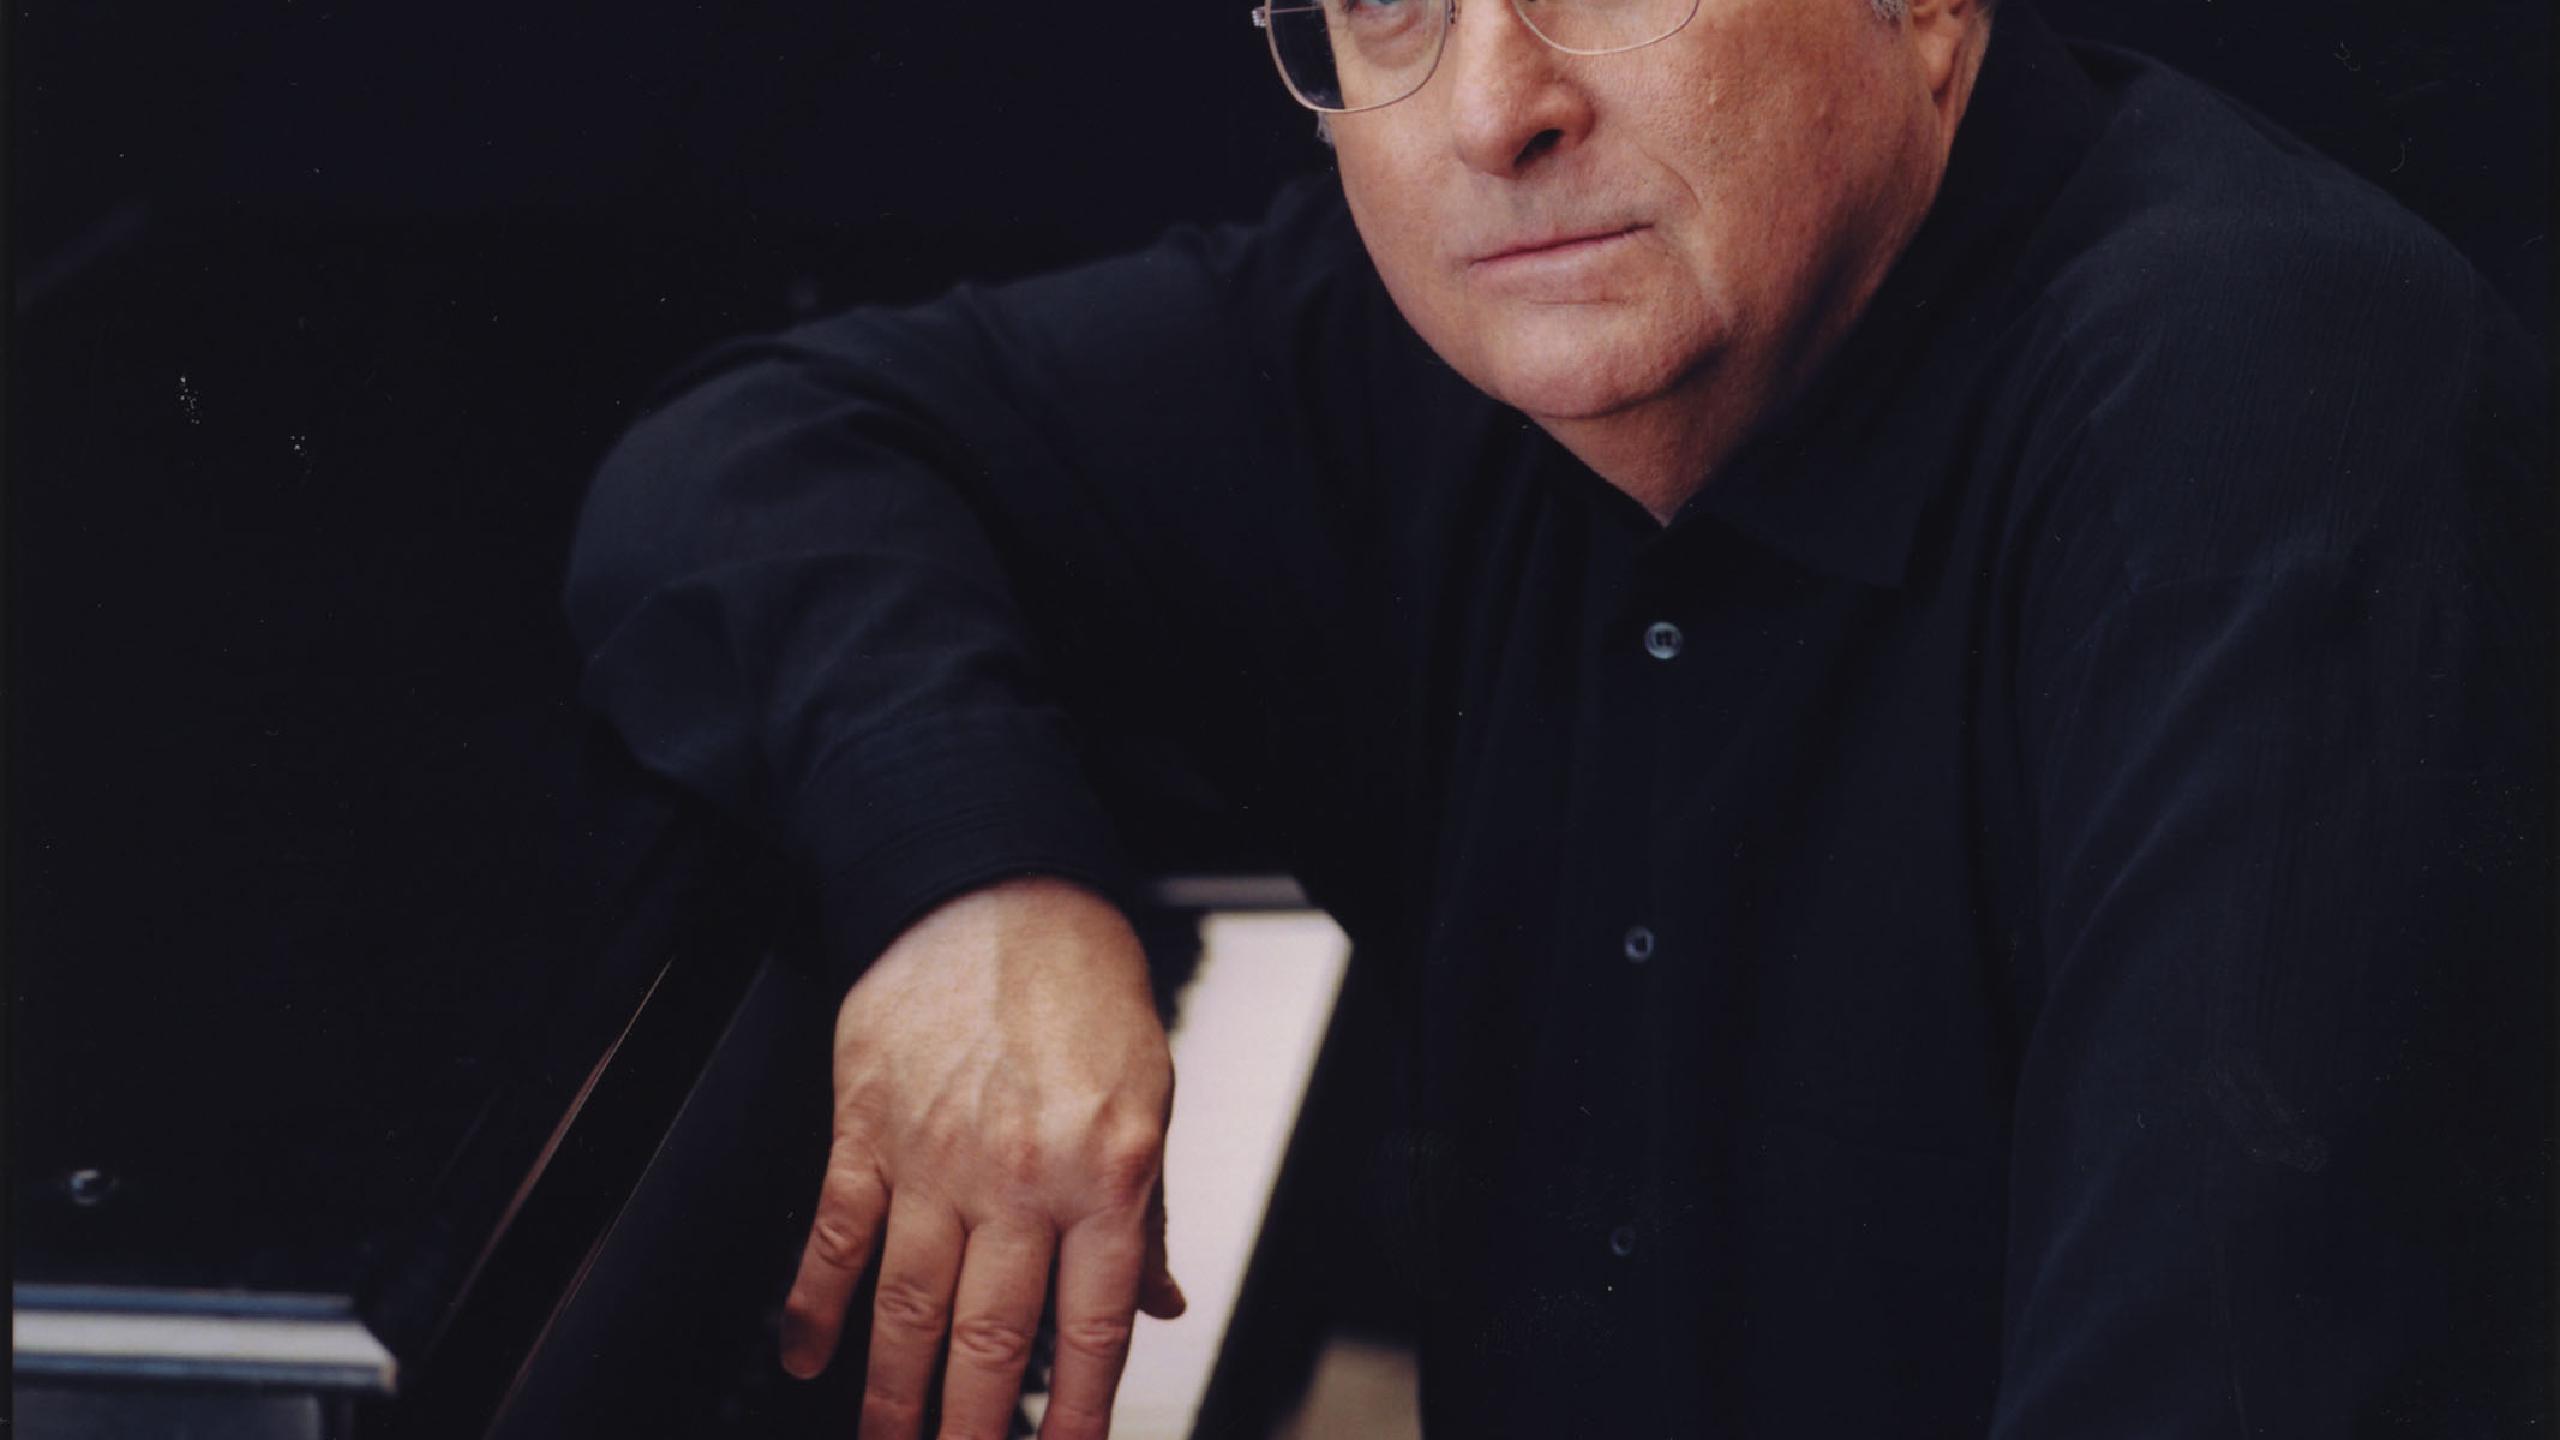 Randy Newman tour dates 2022 2023. Randy Newman tickets and concerts